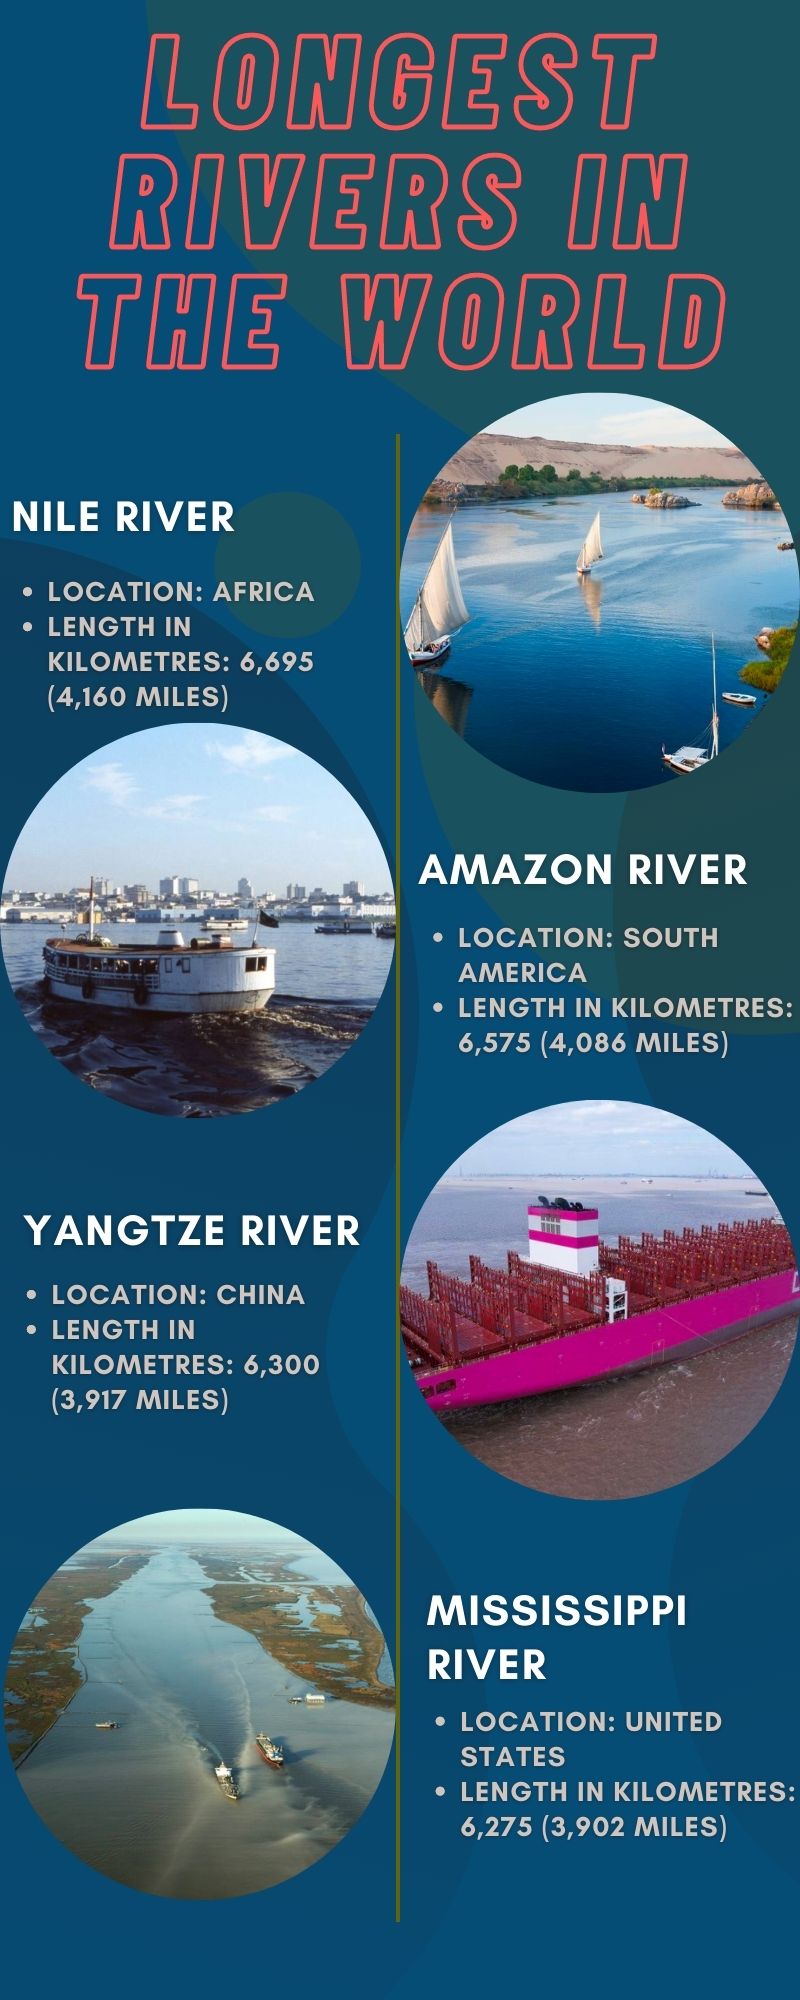 Longest rivers in the world